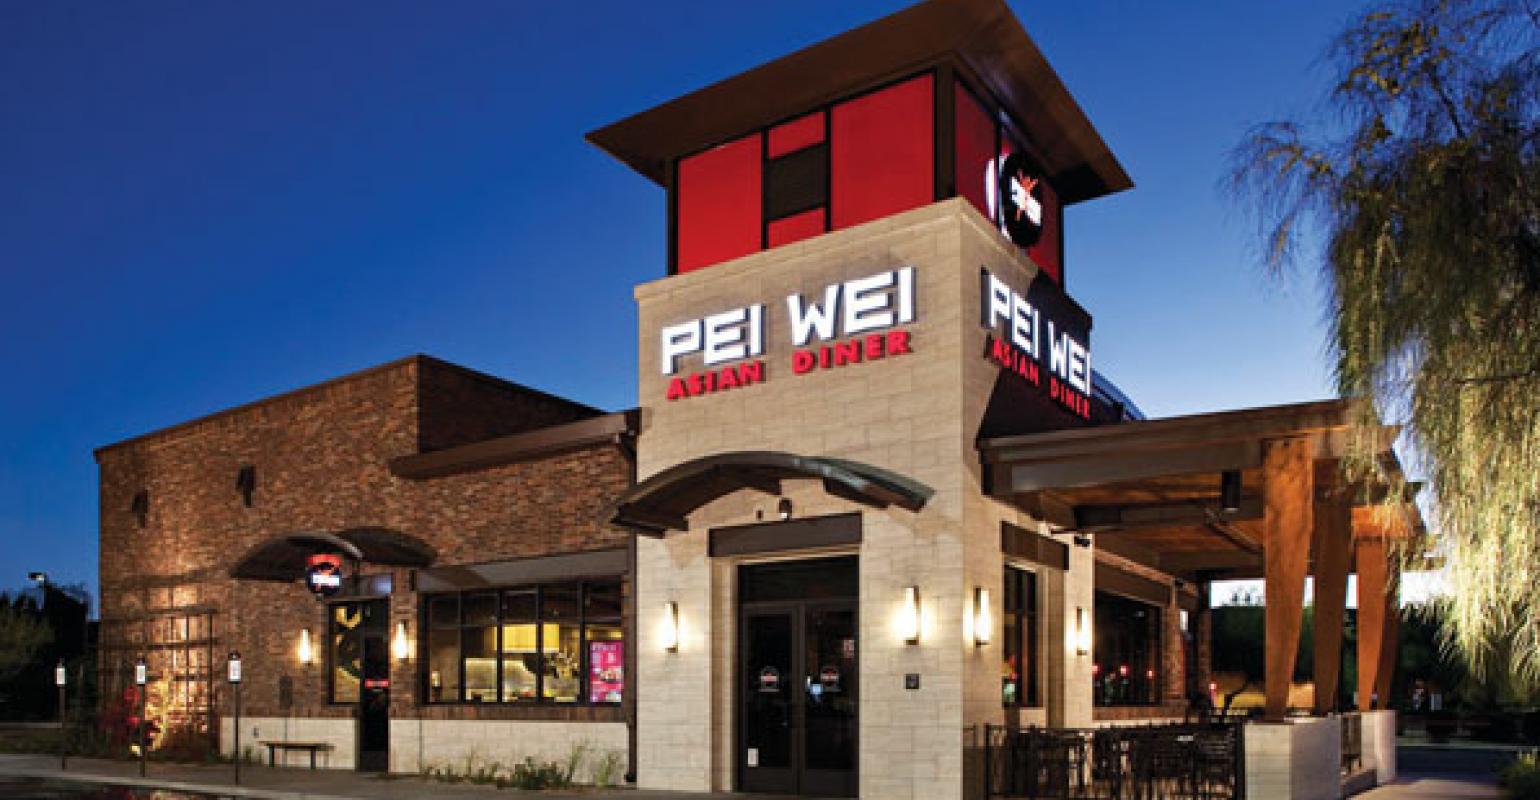 Pei Wei menu prices featuring 358 items ranging from $0.99 to $9.99